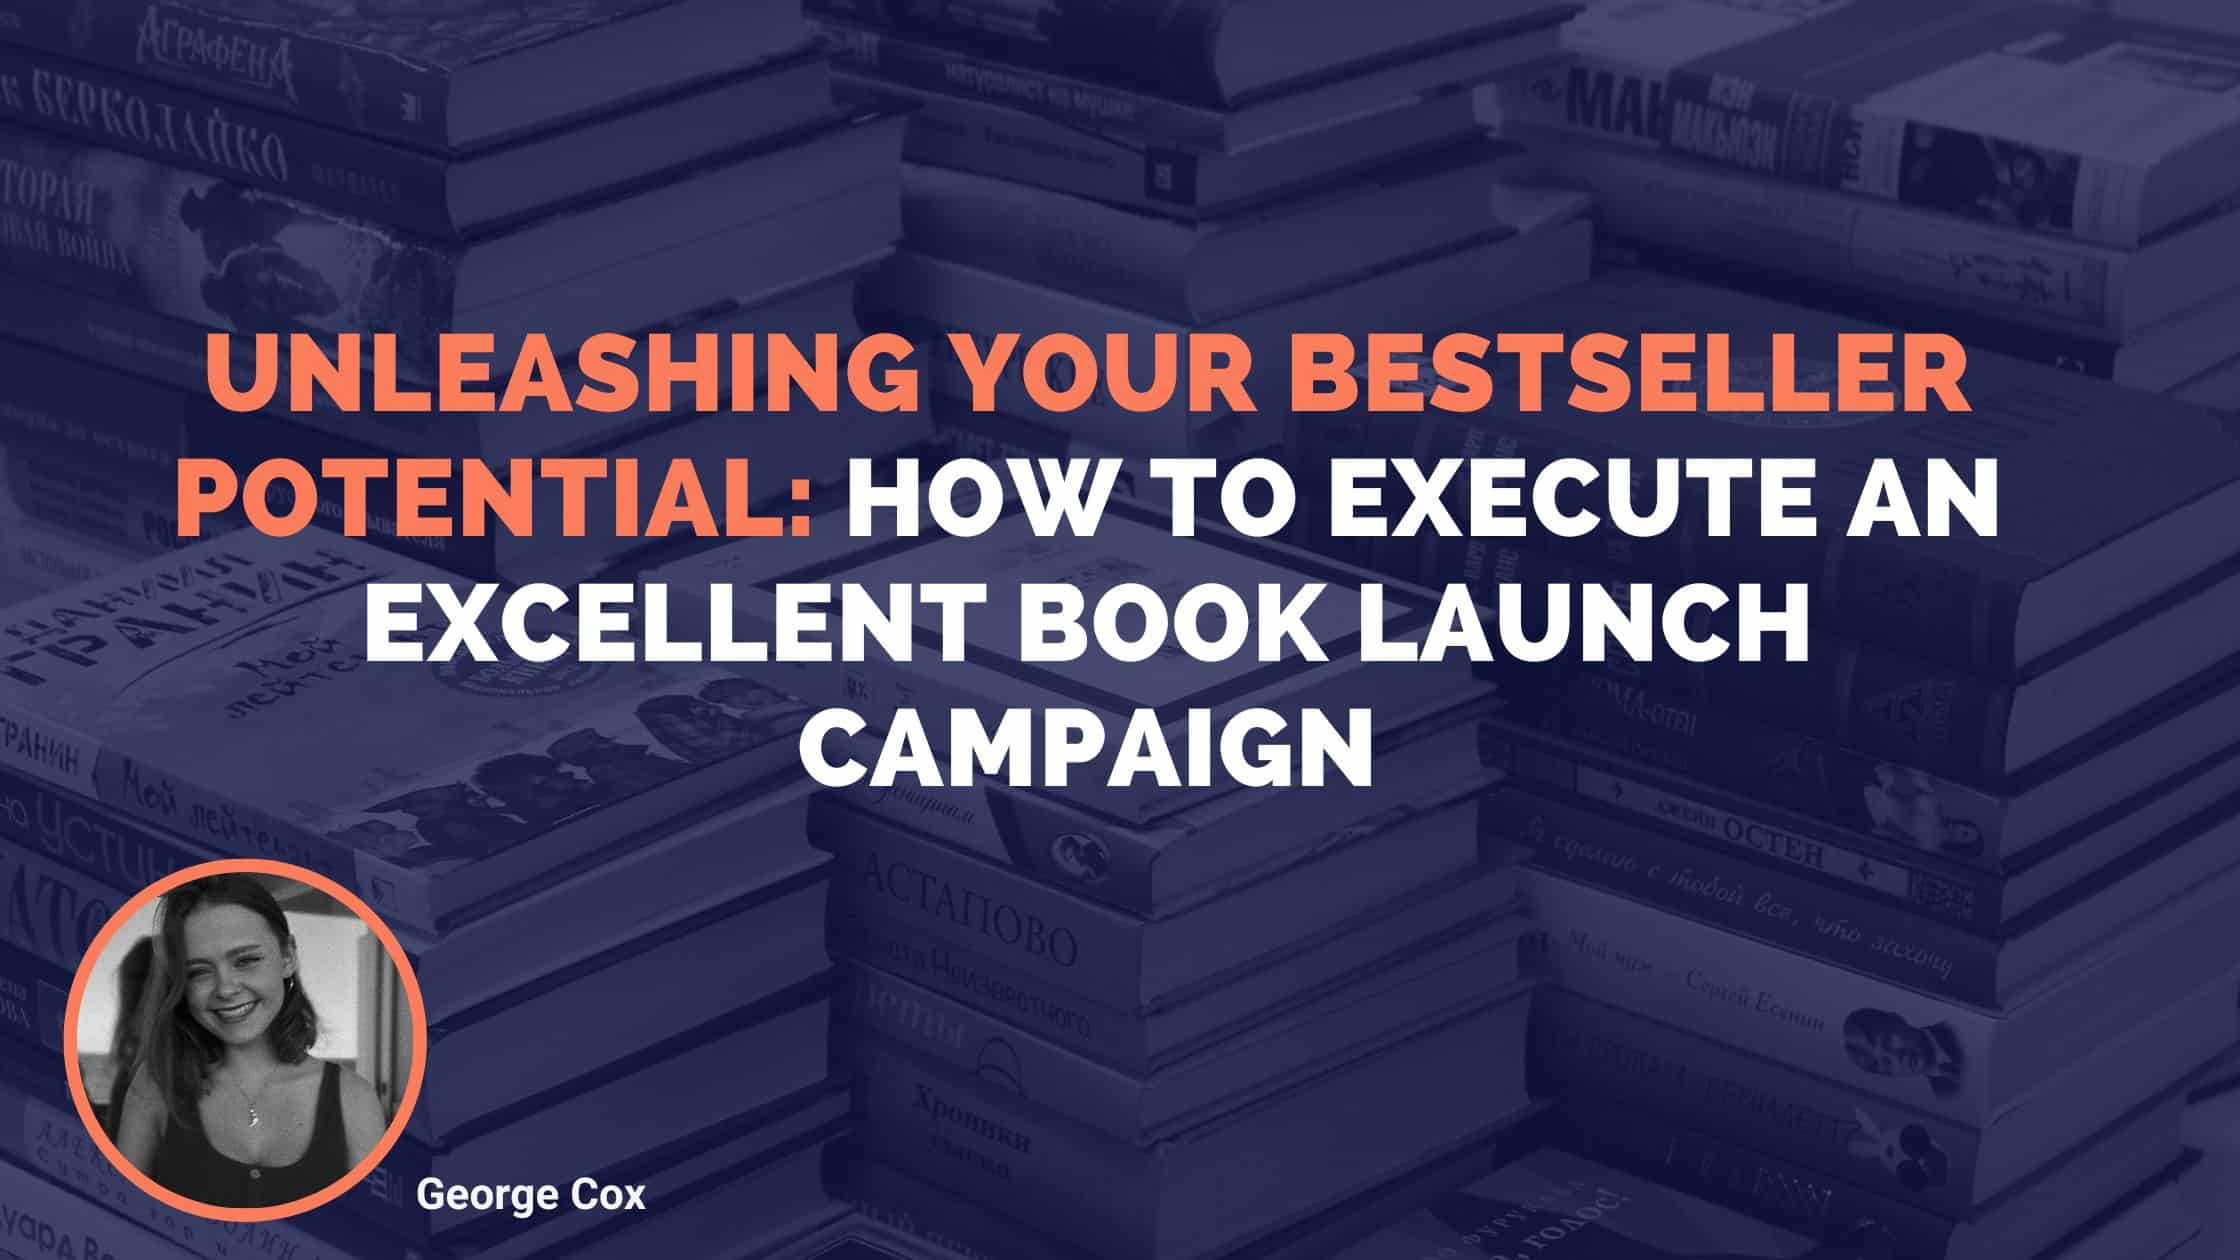 Unleashing Your Bestseller Potential: How To Execute An Excellent Book Launch Campaign